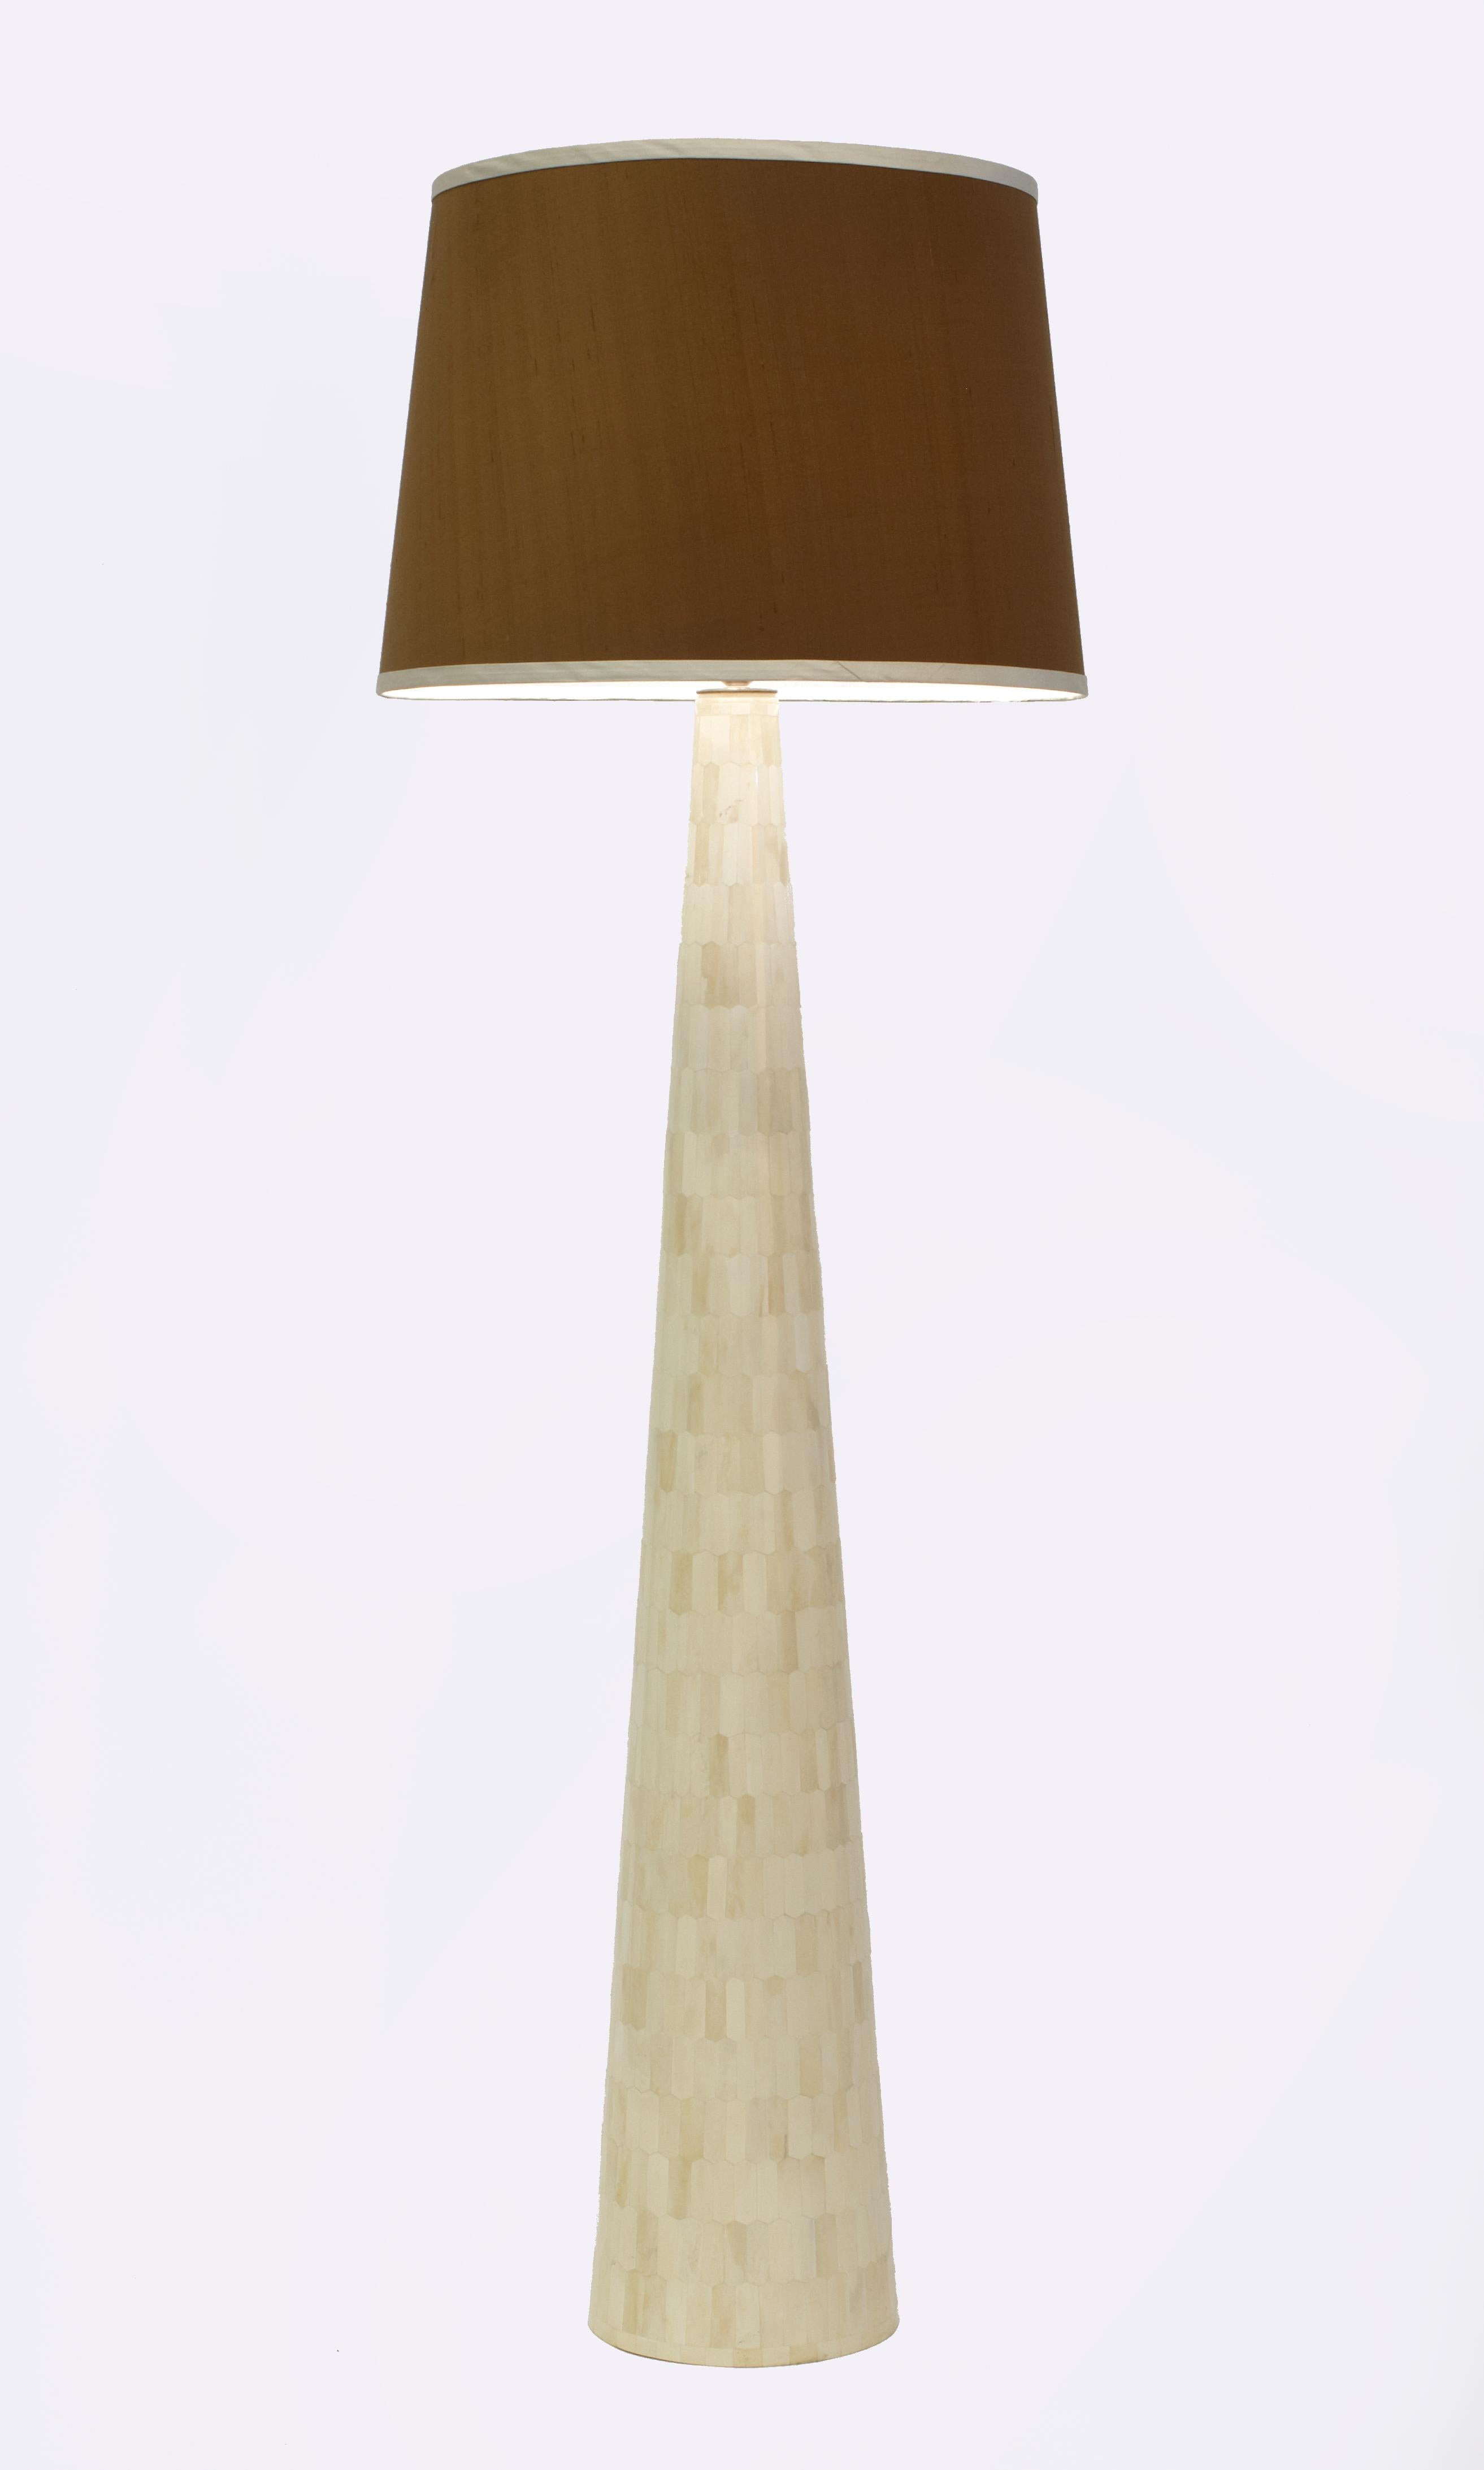 conical lamp